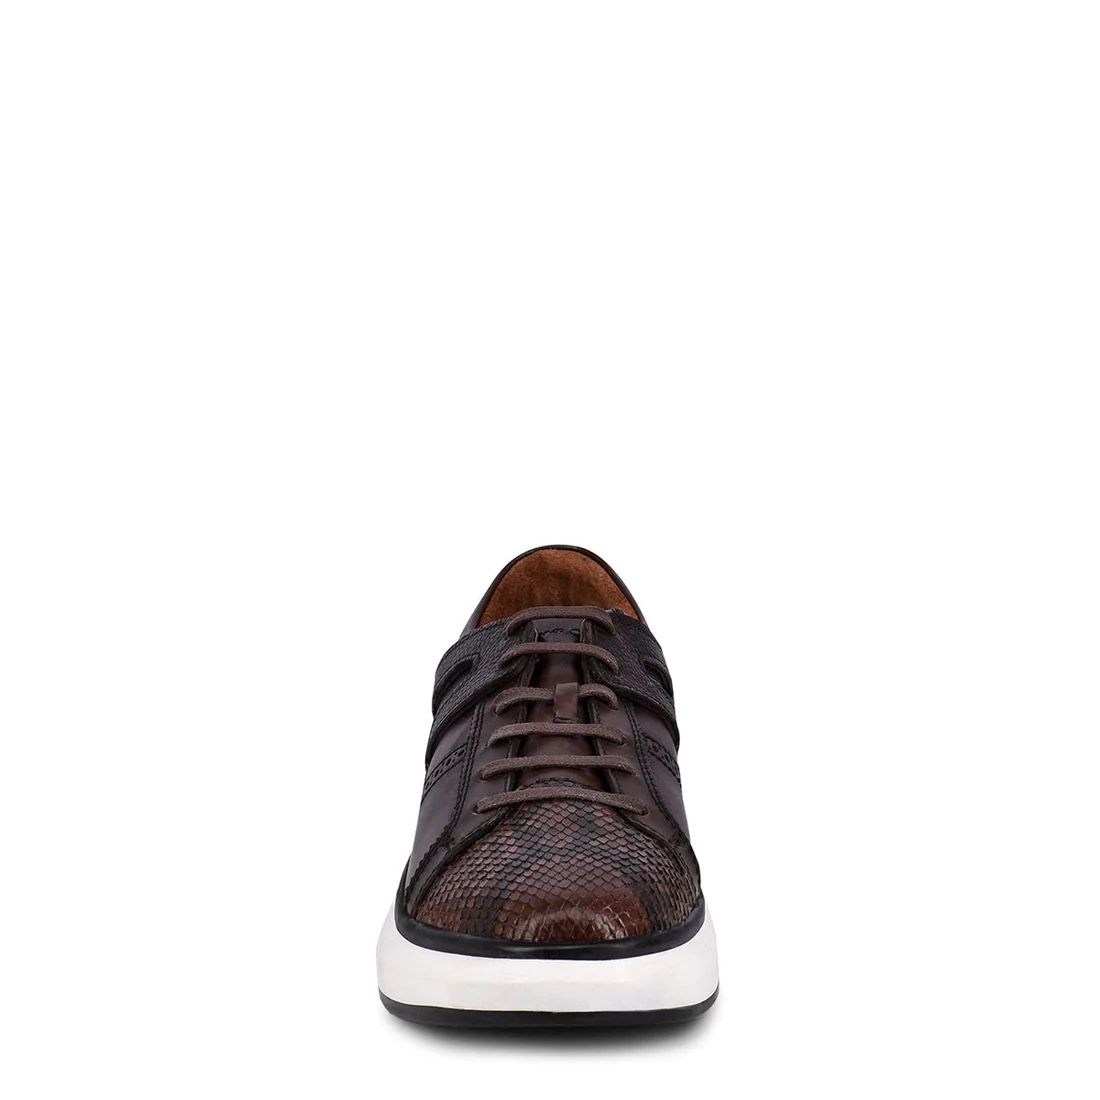 Cuadra | Hand-Painted Python Chocolate Leather Sneakers